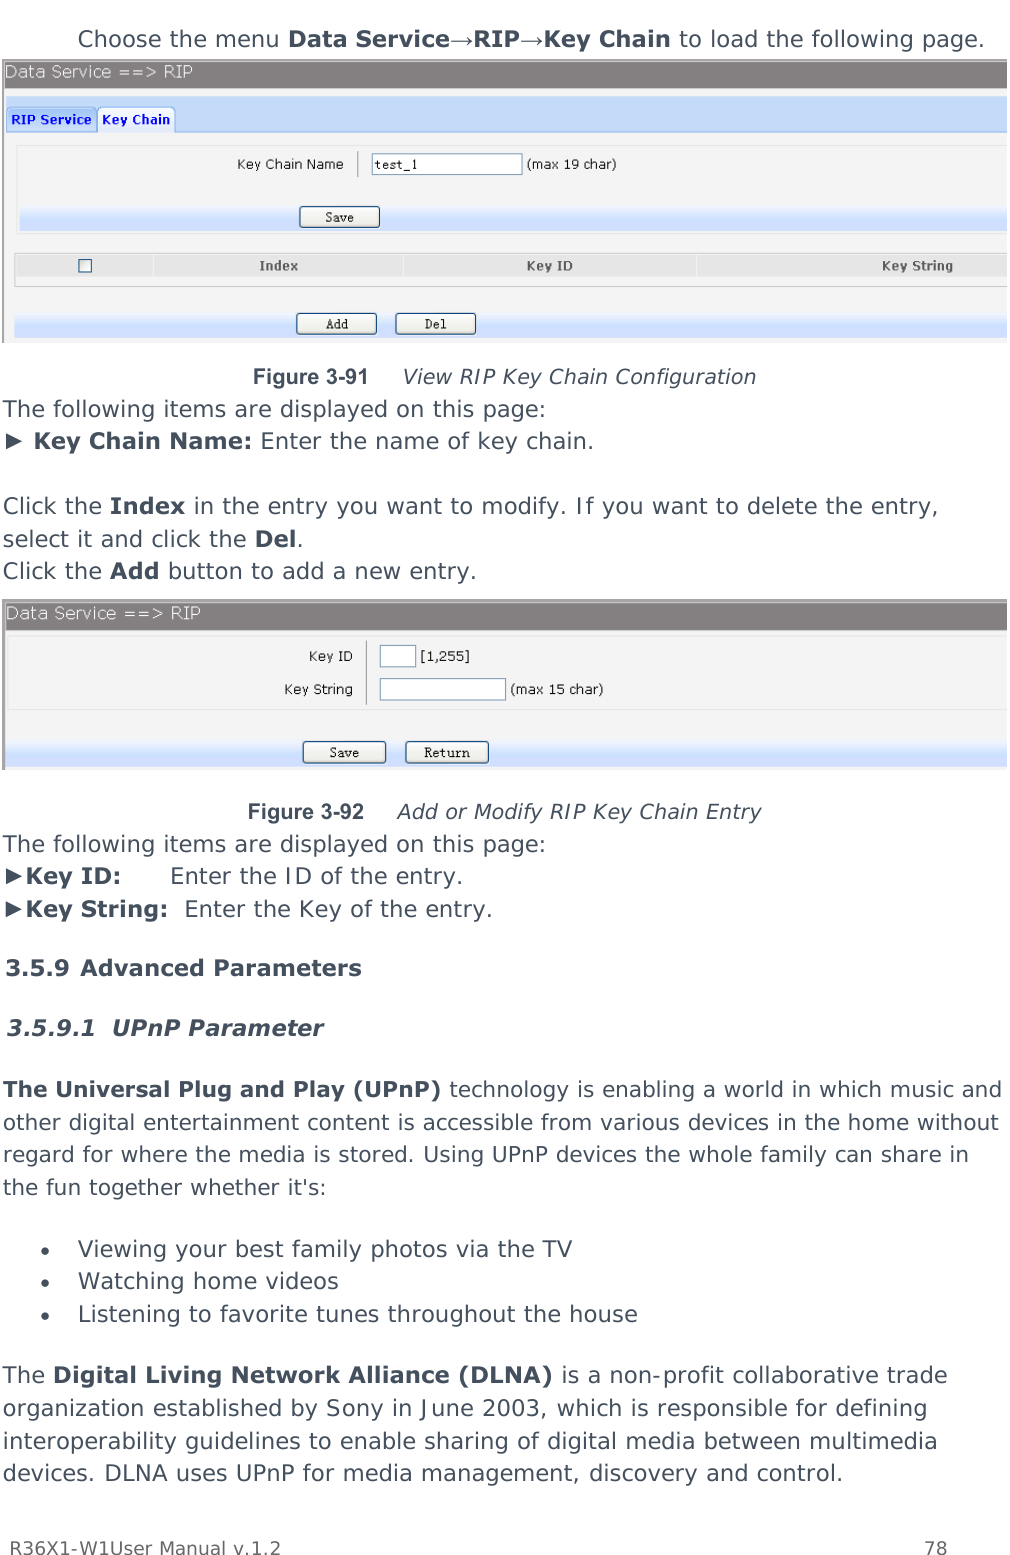           R36X1-W1User Manual v.1.2    78   Choose the menu Data Service→RIP→Key Chain to load the following page.  Figure 3-91  View RIP Key Chain Configuration The following items are displayed on this page: ► Key Chain Name: Enter the name of key chain.  Click the Index in the entry you want to modify. If you want to delete the entry, select it and click the Del. Click the Add button to add a new entry.  Figure 3-92  Add or Modify RIP Key Chain Entry The following items are displayed on this page: ►Key ID:      Enter the ID of the entry. ►Key String:  Enter the Key of the entry. 3.5.9 Advanced Parameters 3.5.9.1 UPnP Parameter The Universal Plug and Play (UPnP) technology is enabling a world in which music and other digital entertainment content is accessible from various devices in the home without regard for where the media is stored. Using UPnP devices the whole family can share in the fun together whether it&apos;s:  Viewing your best family photos via the TV  Watching home videos  Listening to favorite tunes throughout the house The Digital Living Network Alliance (DLNA) is a non-profit collaborative trade organization established by Sony in June 2003, which is responsible for defining interoperability guidelines to enable sharing of digital media between multimedia devices. DLNA uses UPnP for media management, discovery and control. 